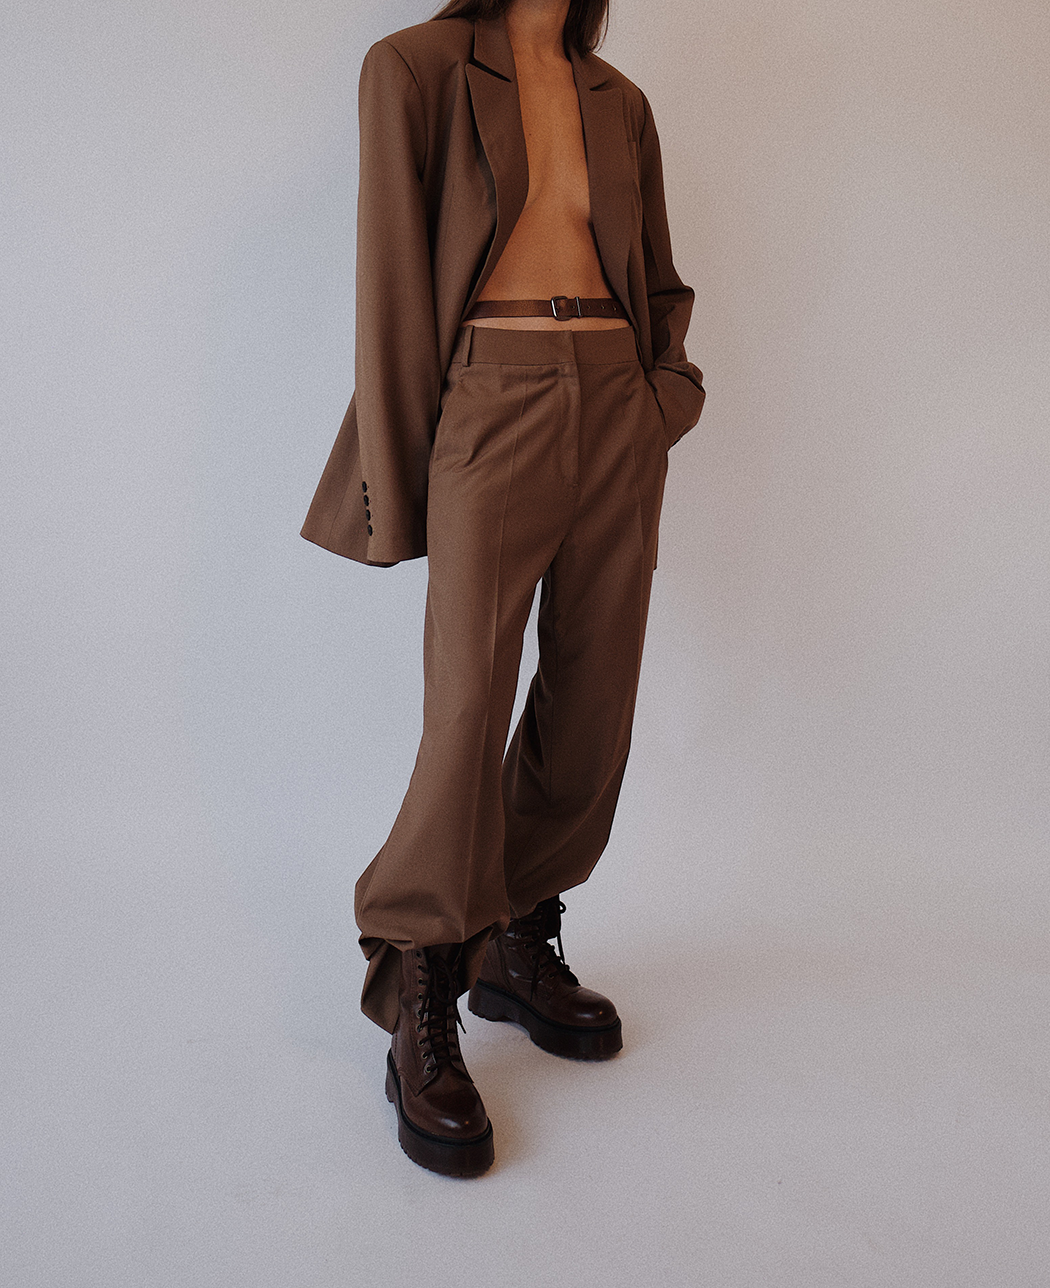 The Oversized Brown Suit — MODEDAMOUR